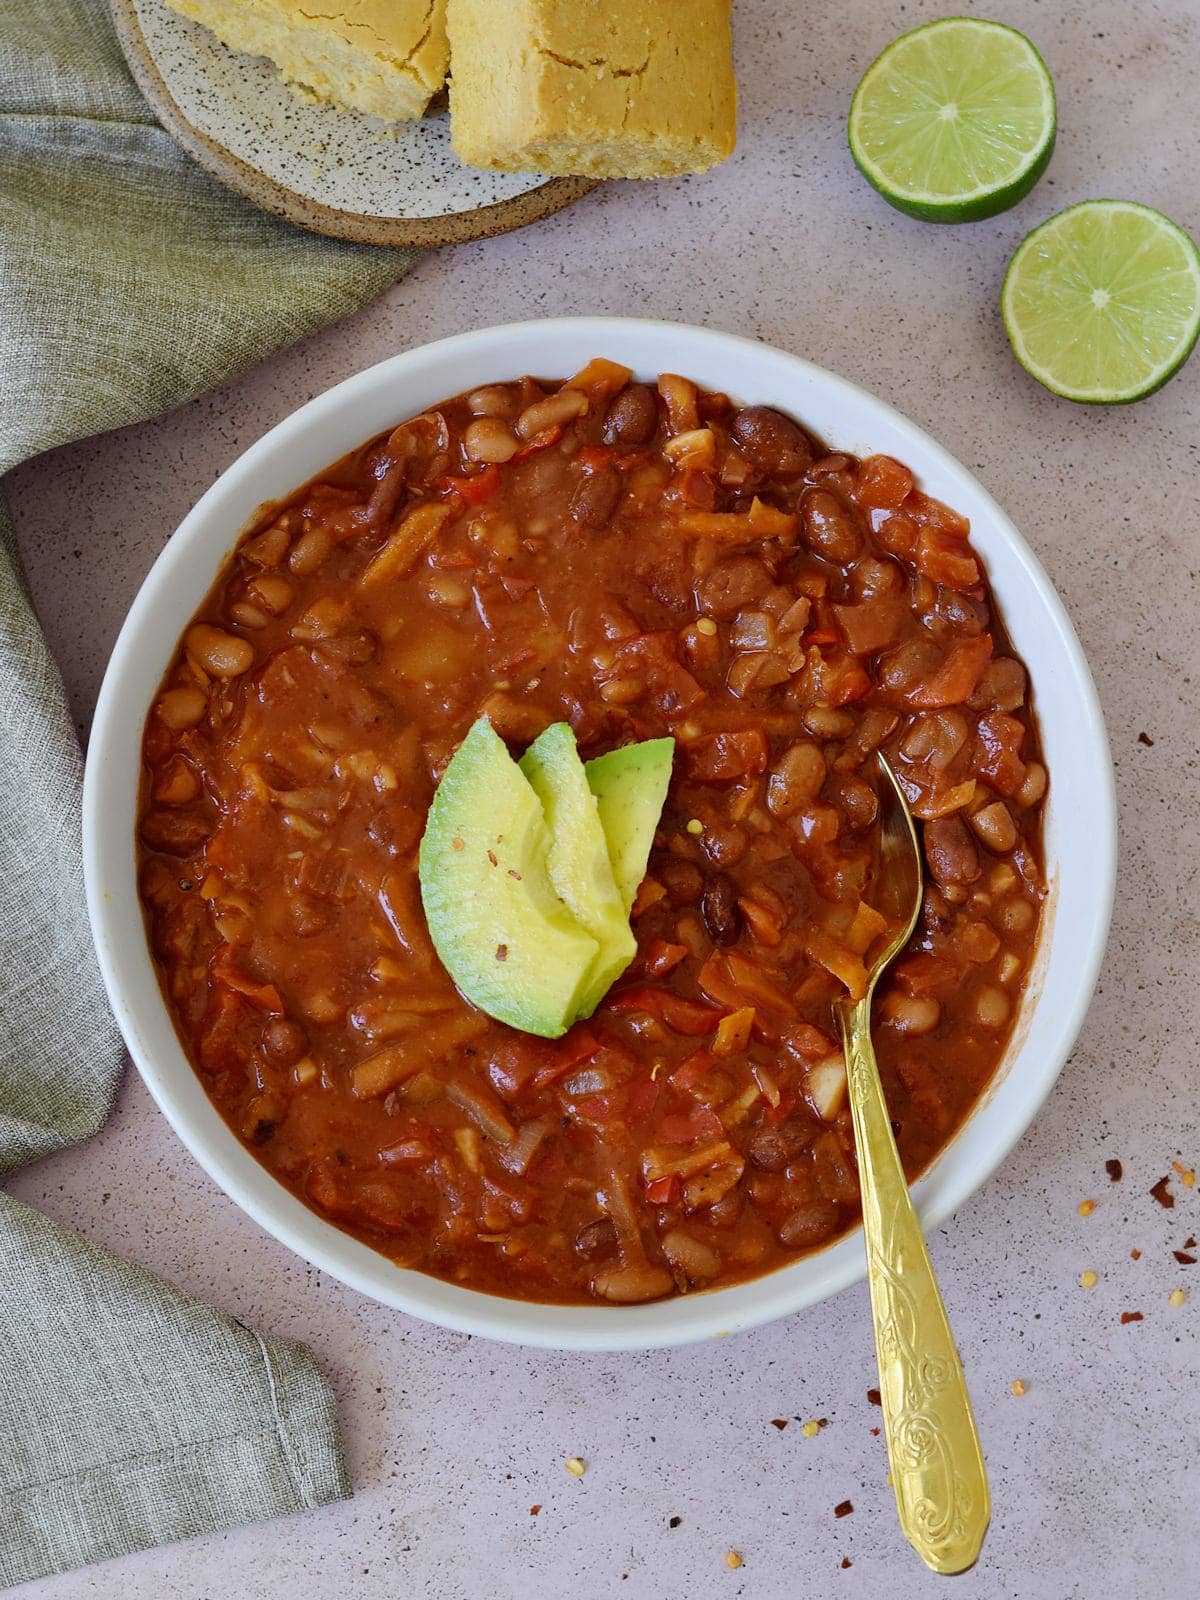 Vegan Chili in bowl with avocado slices and spoon